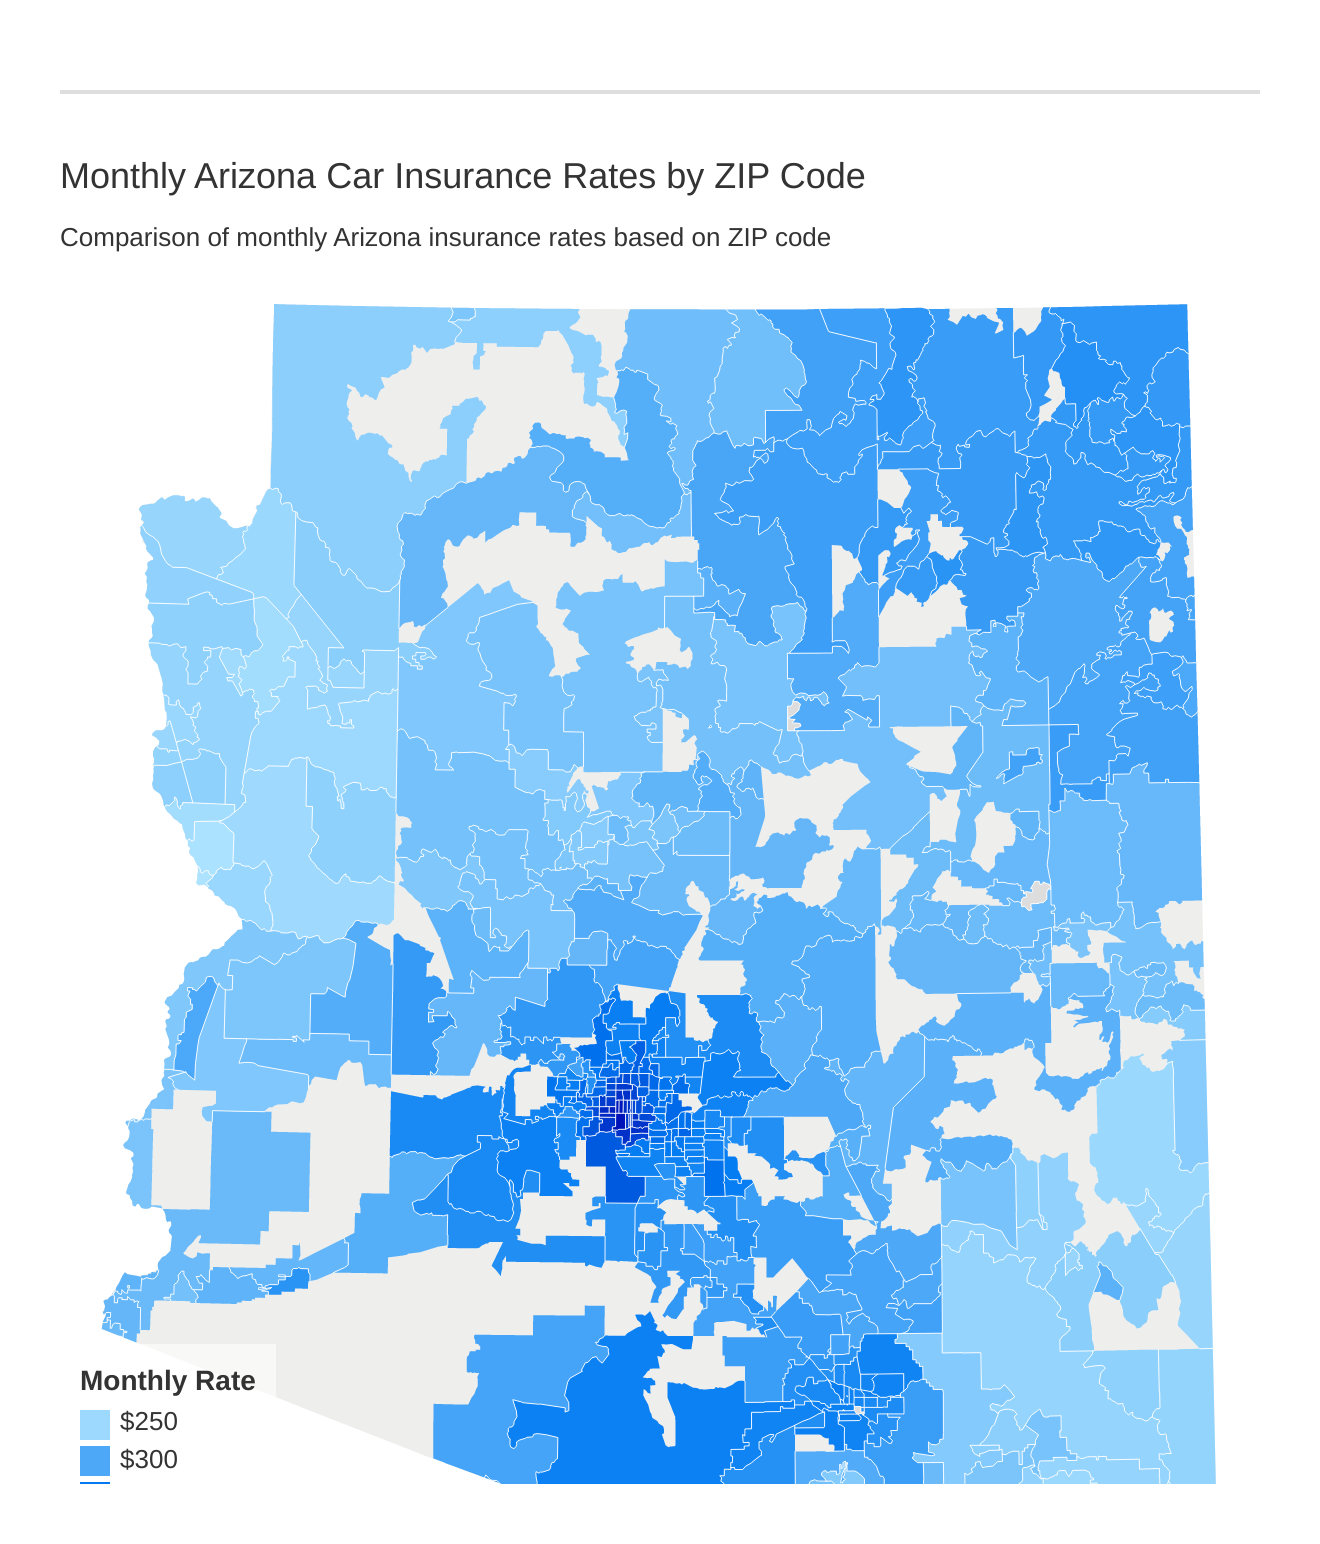 Monthly Arizona Car Insurance Rates by ZIP Code